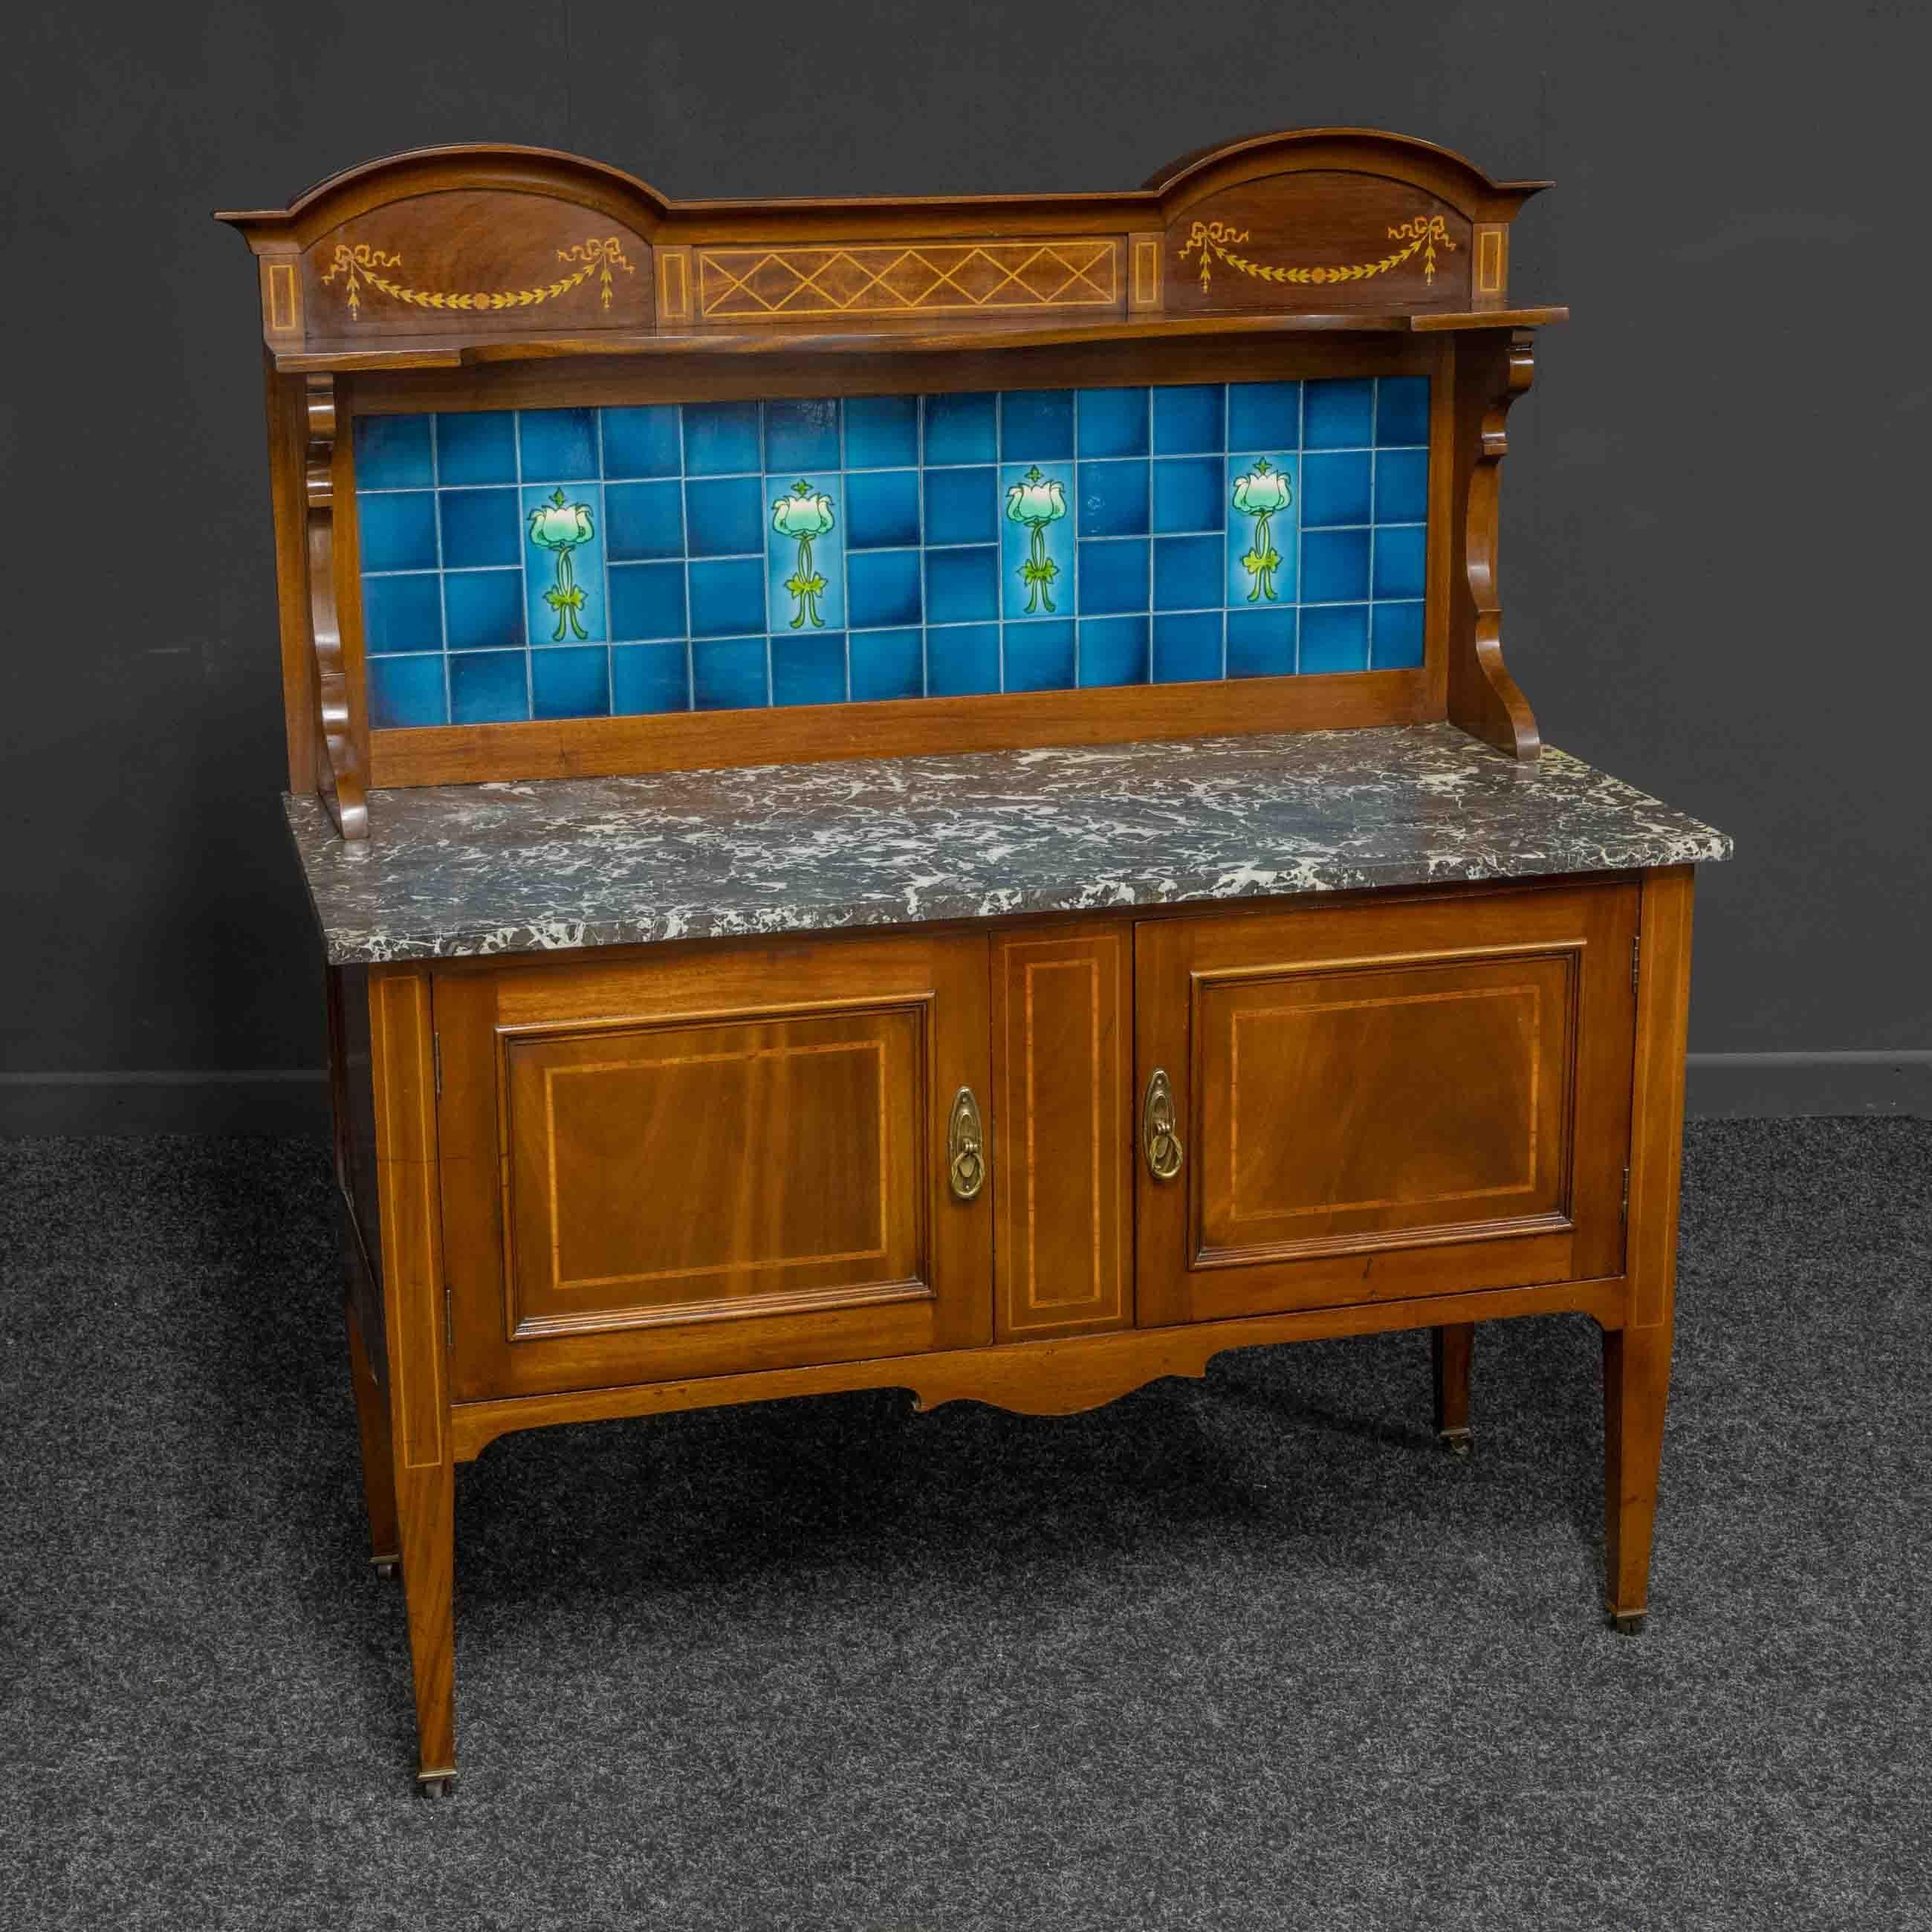 A stunning high quality Edwardian washstand of large proportions. The base is sat on tapering legs with their original brass castors. Supporting two cupboard doors inlaid with both crossbanding and string inlays. Above is a heavy grey and white